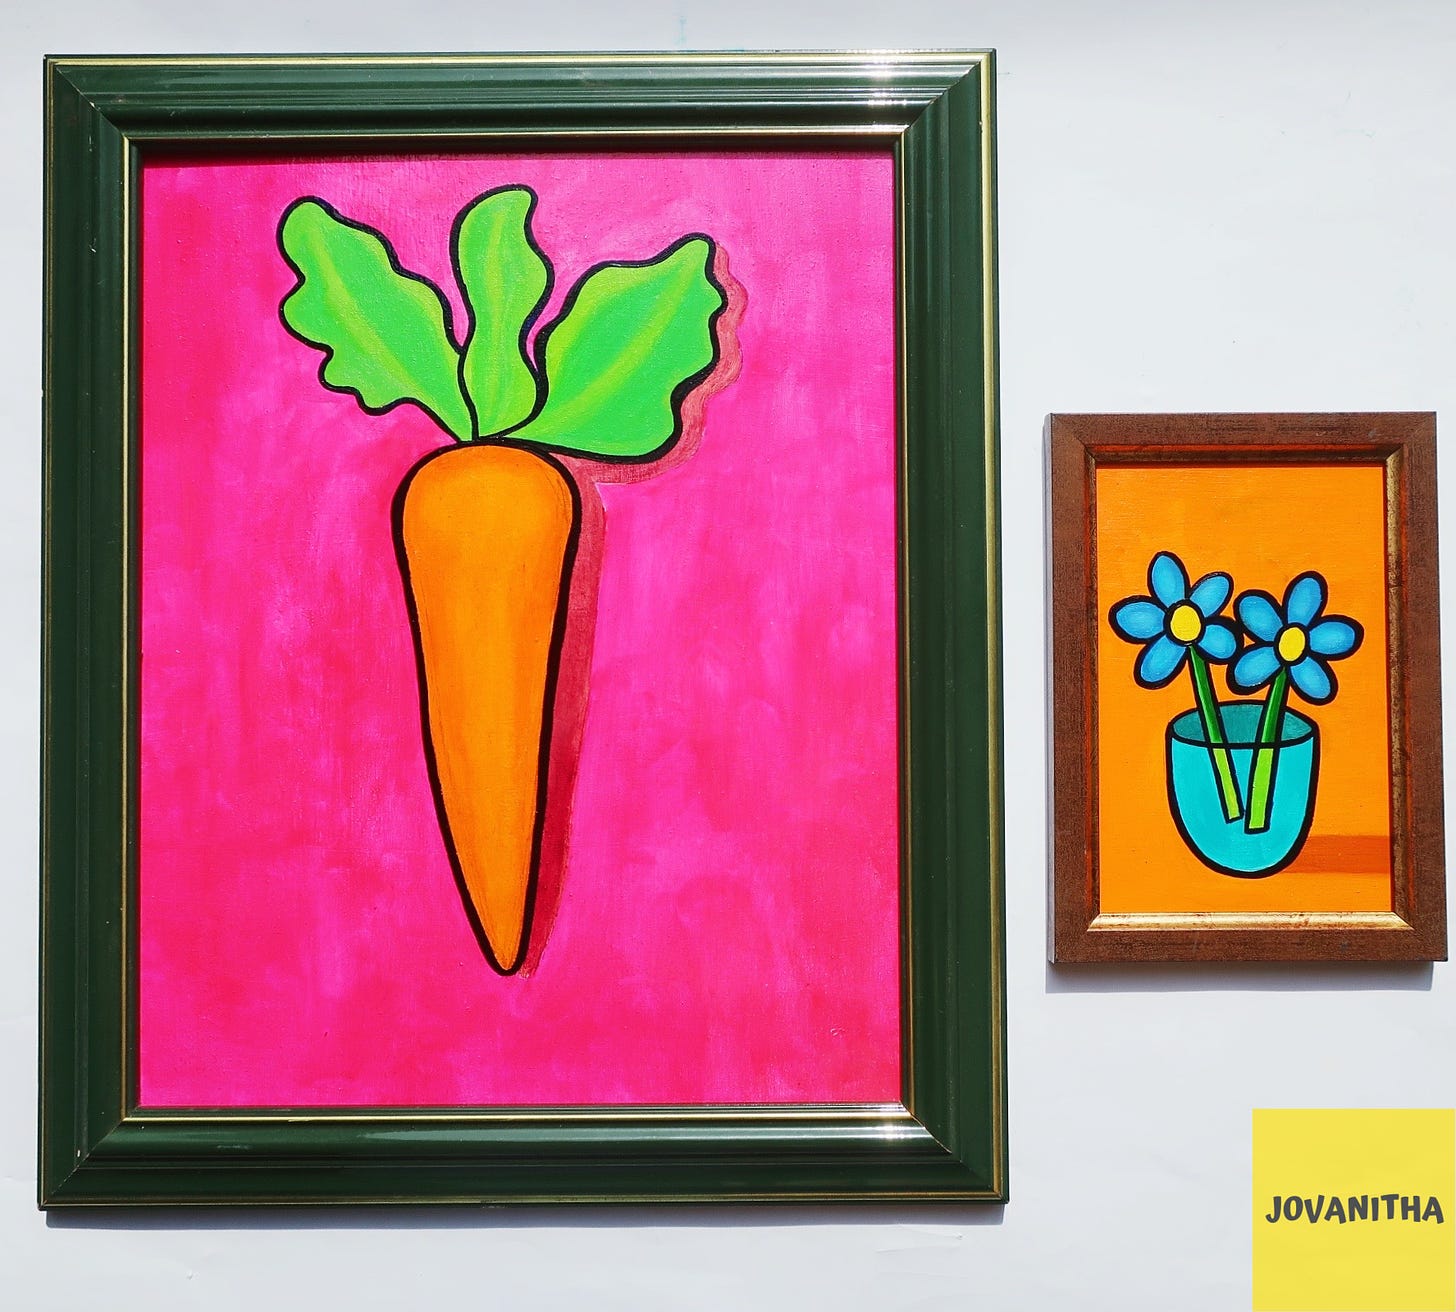 An oil painting of an orange carrot on a pink background and blue forget-me-not flowers in thrifted frames